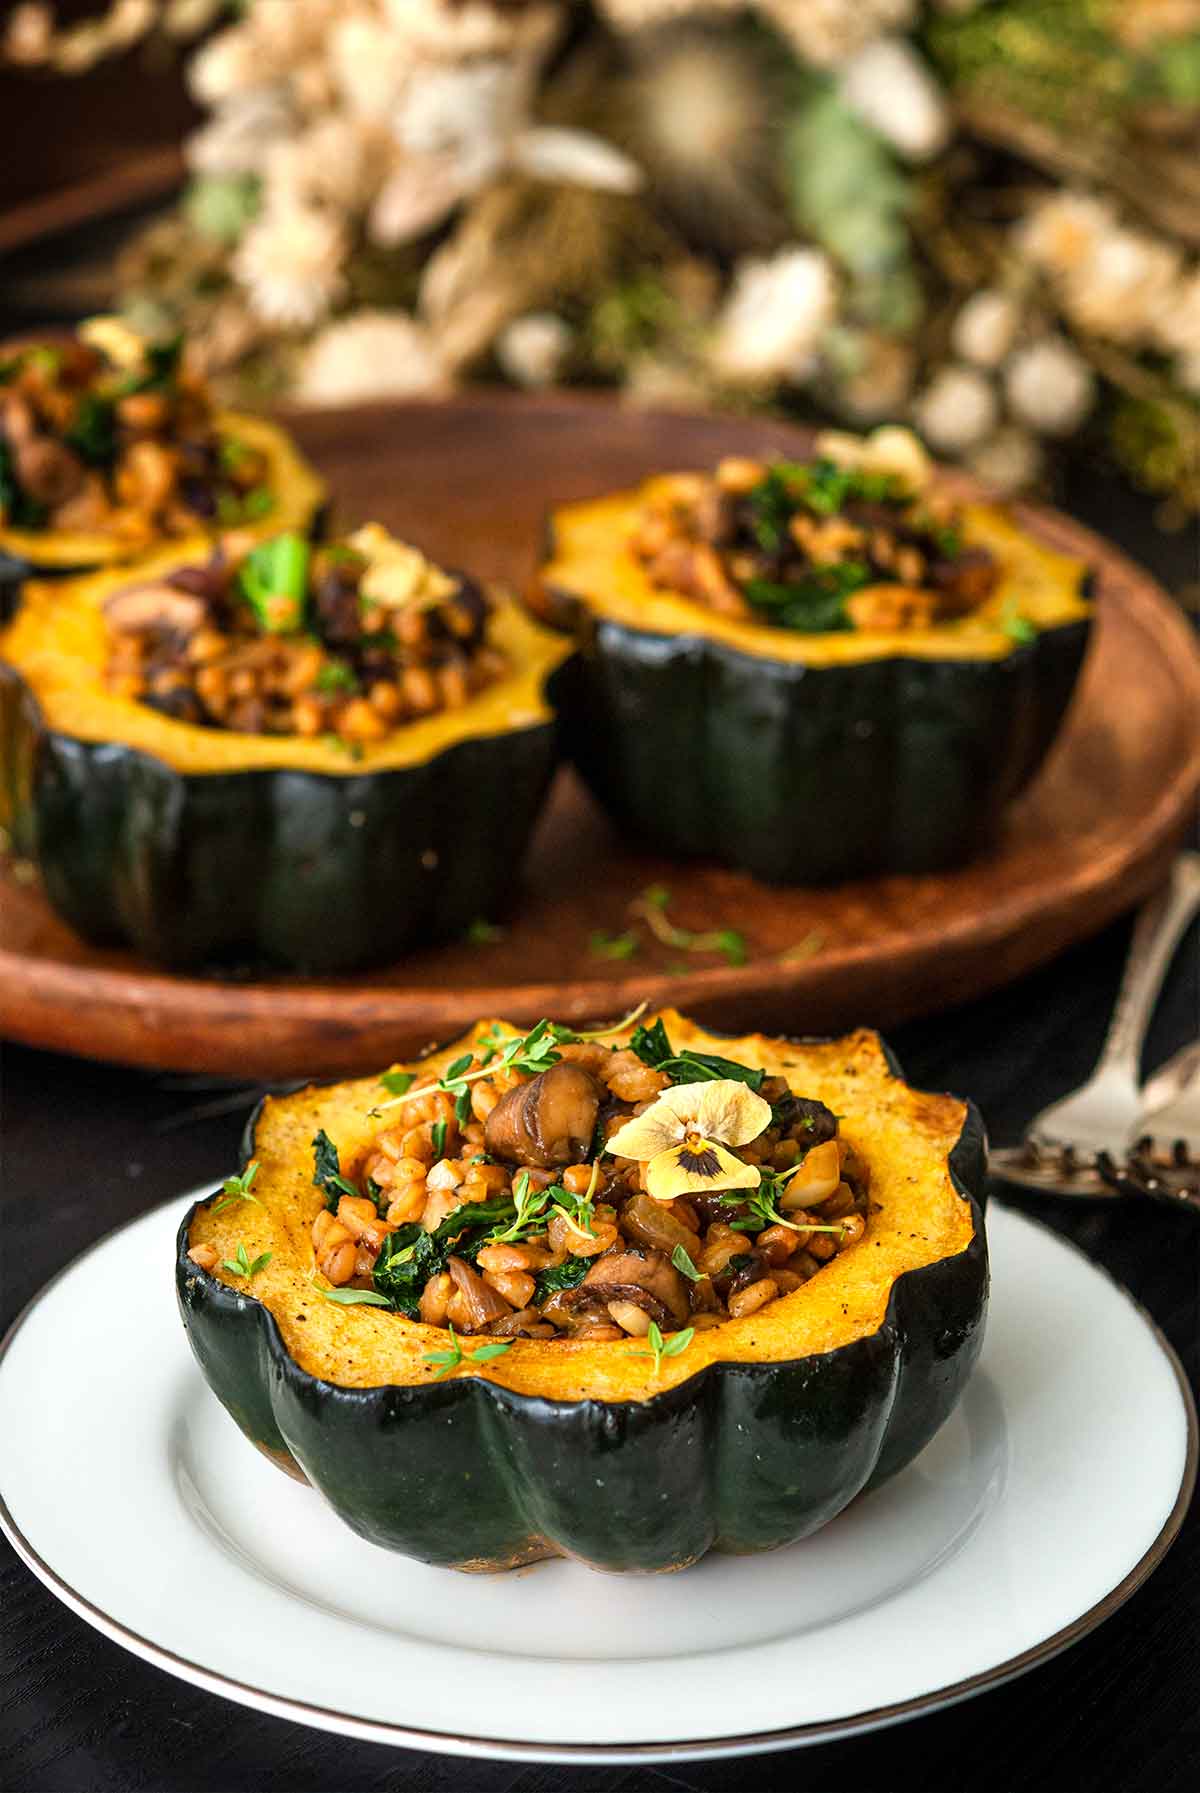 1 stuffed acorn squash on a plate in front of 3 others in front of dry flowers on a table.